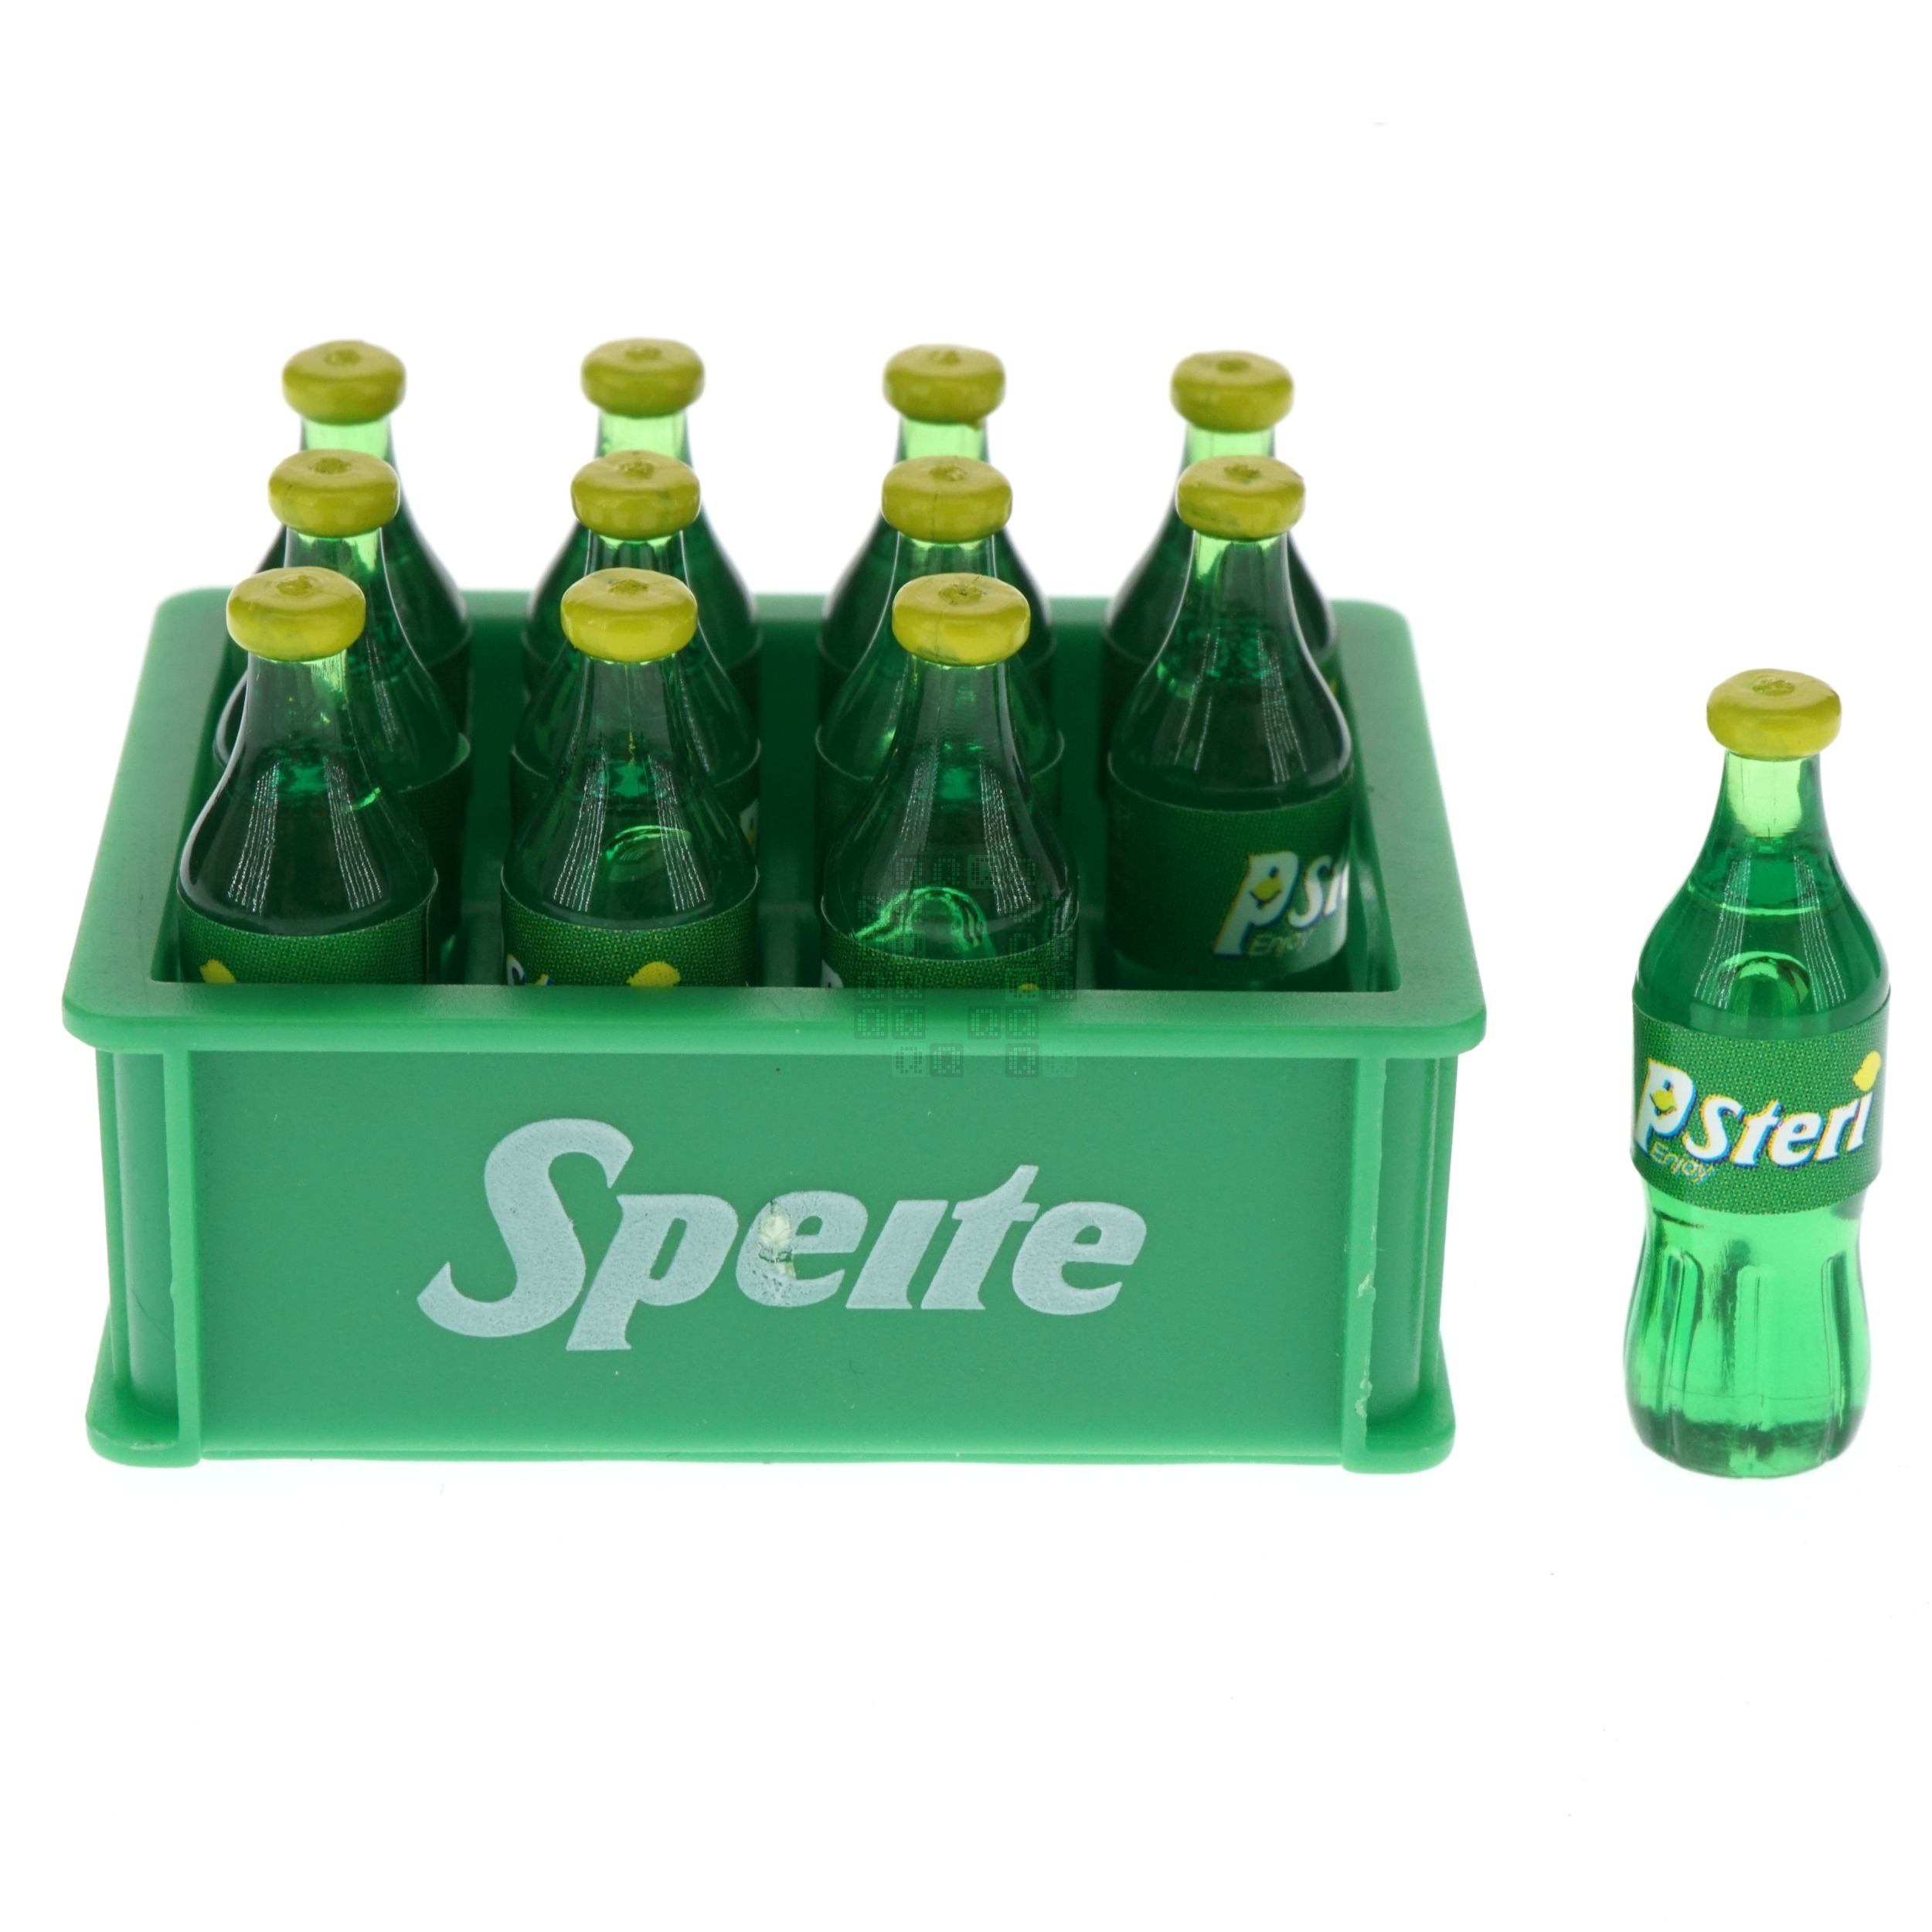 1:12 Scale, 12 Miniature Speite/Psteri 'Glass' Bottles in Plastic Carrying Case